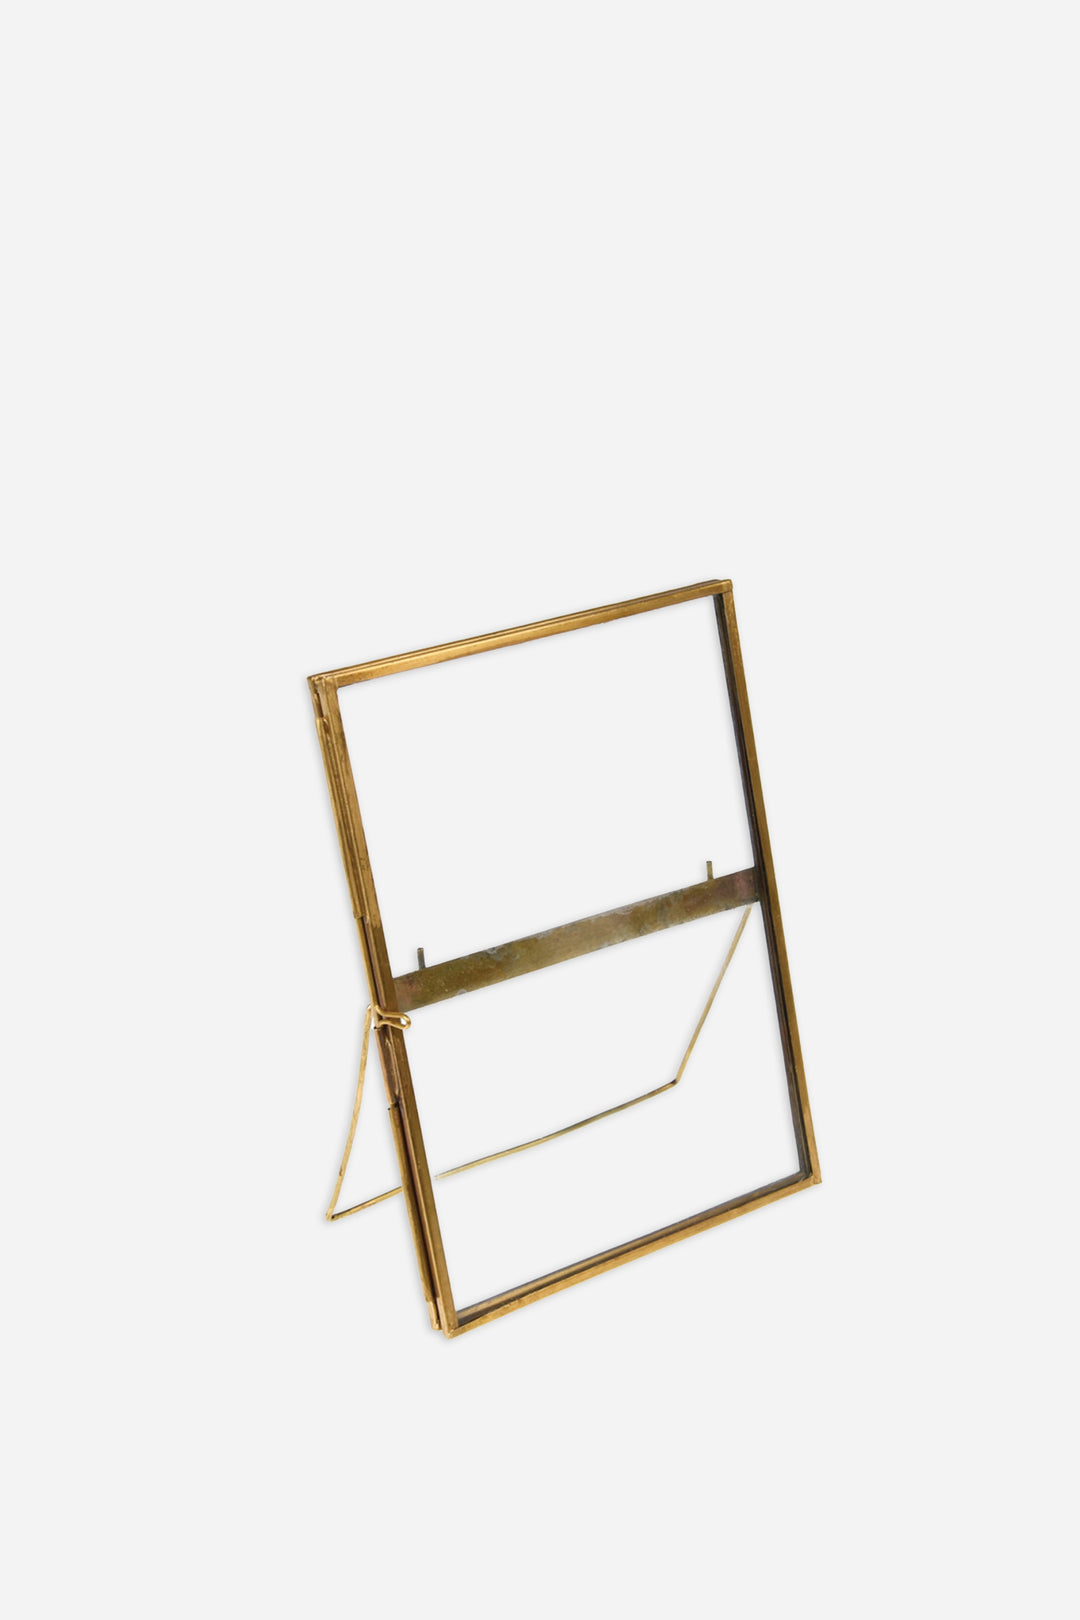 Standing Brass Frame 18 x 13cm - Domestic Science Home